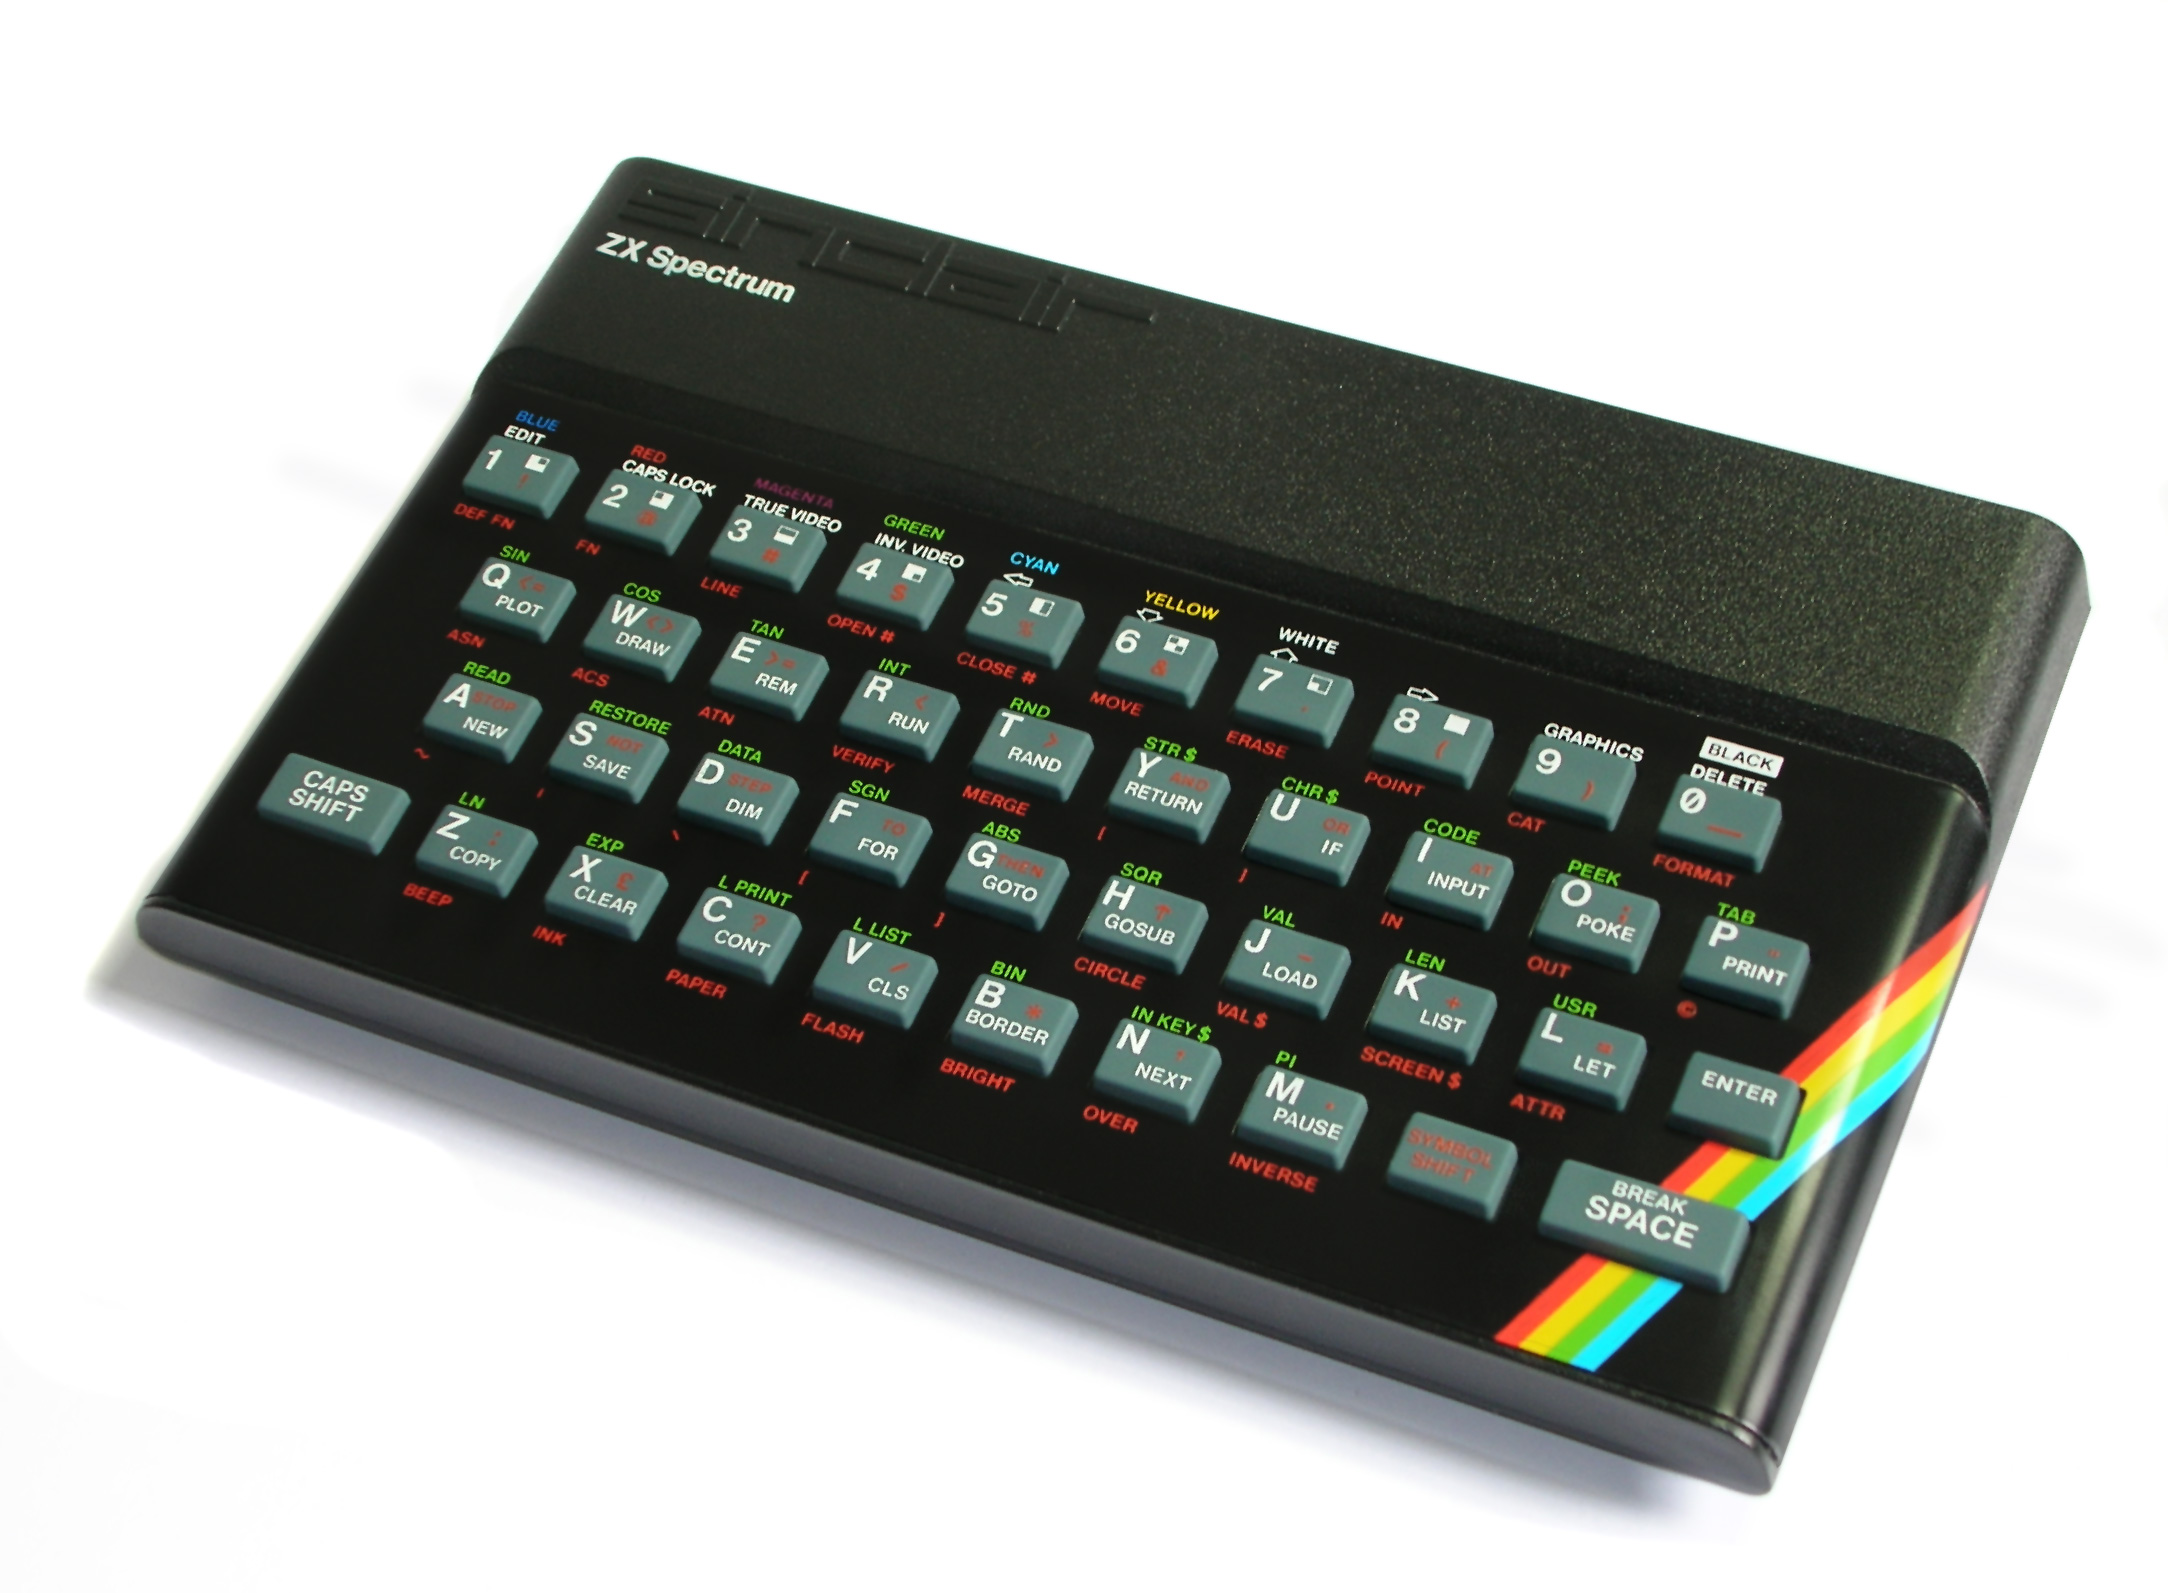 The Spectrum. Ian's first computer able to display graphics in colour.